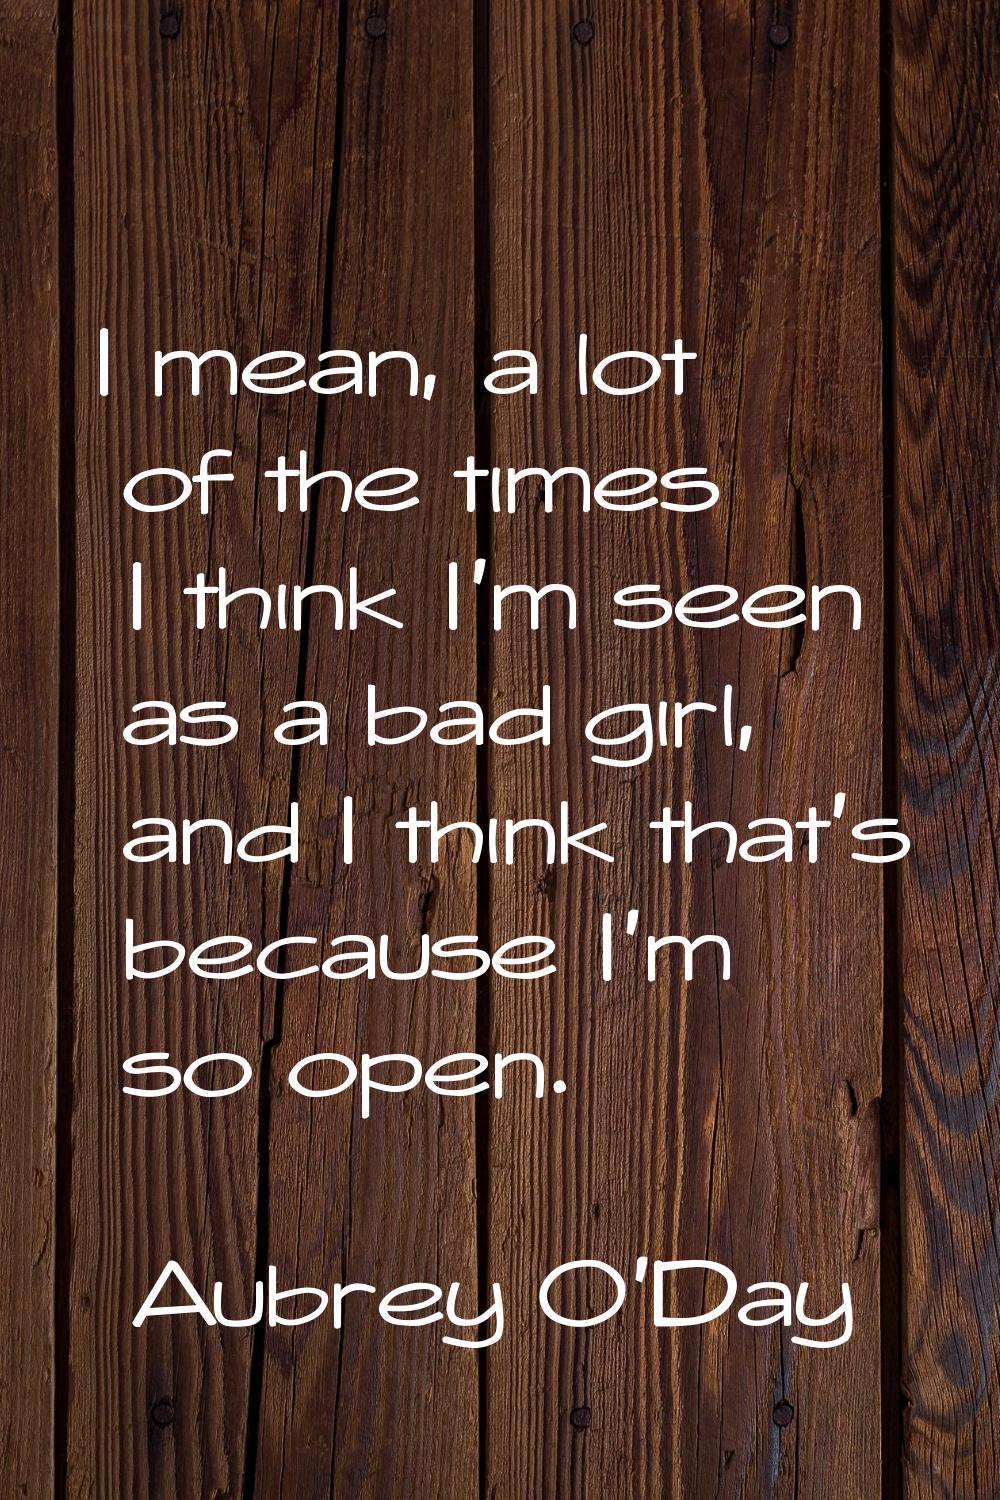 I mean, a lot of the times I think I'm seen as a bad girl, and I think that's because I'm so open.